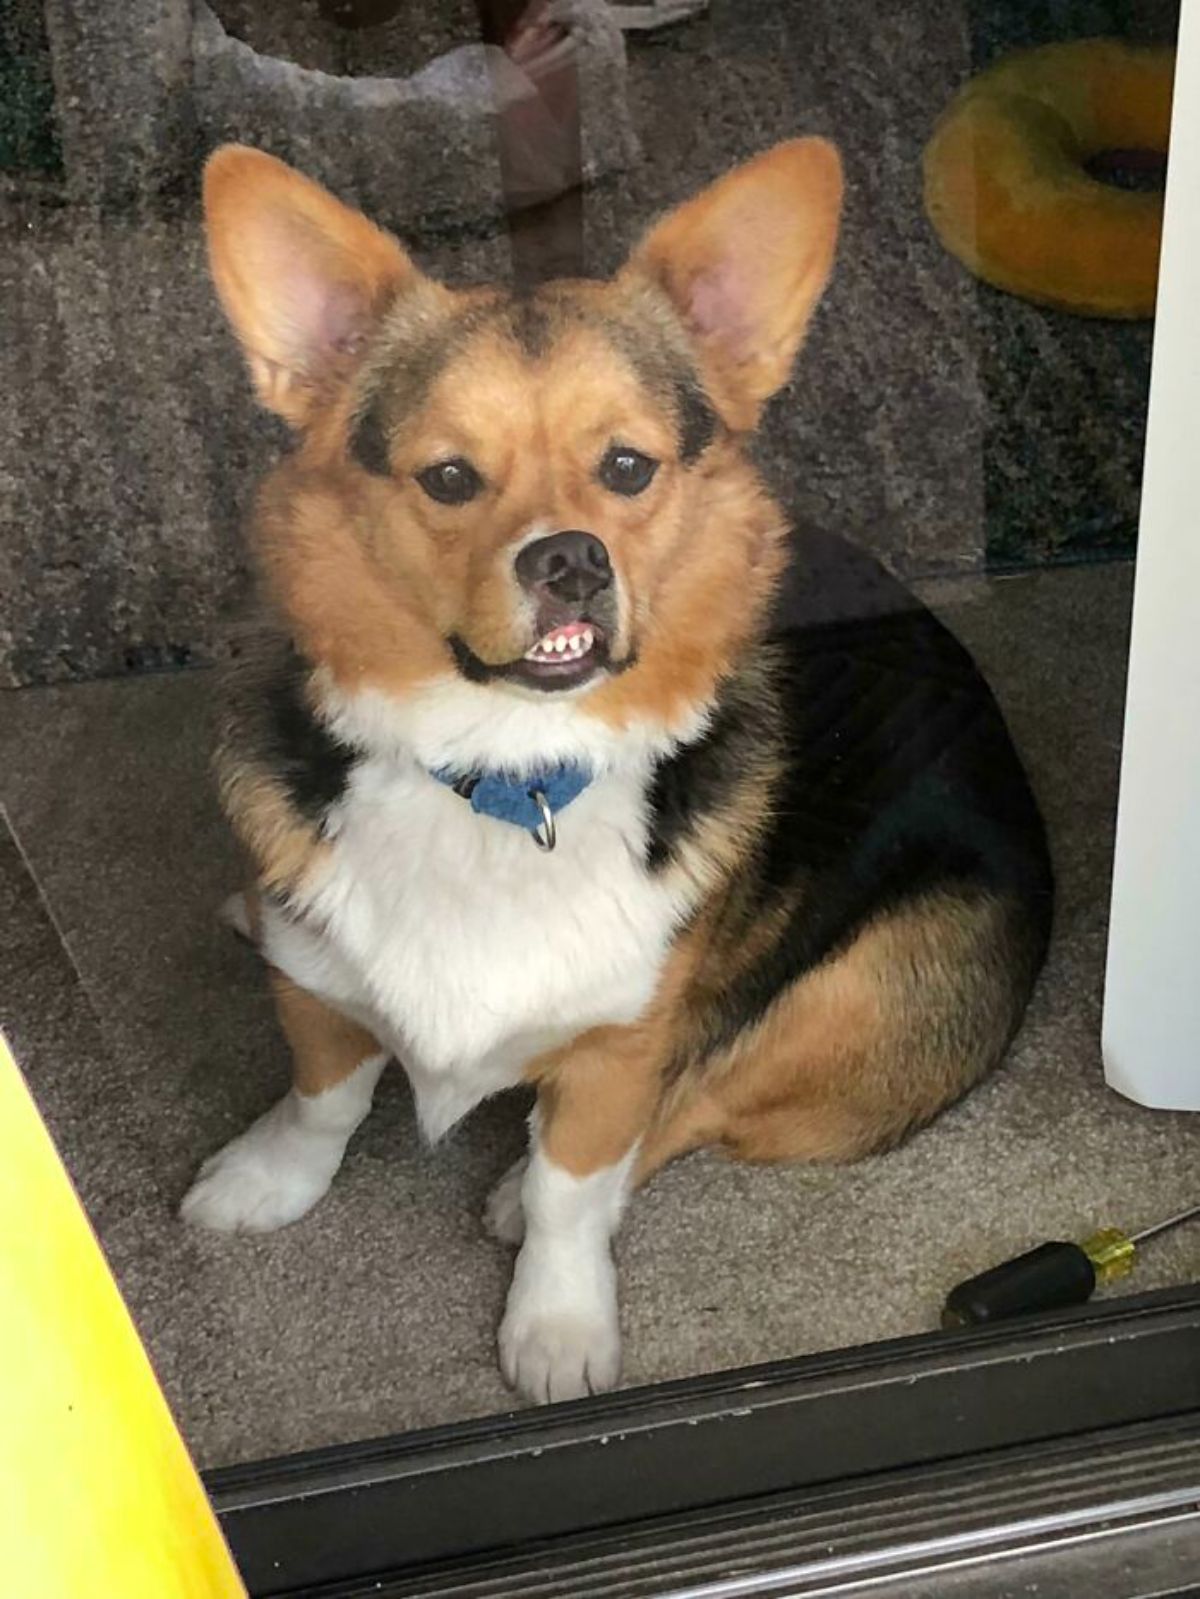 black brown and white corgi with its face smushed against glass with its teeth showing sitting on the floor